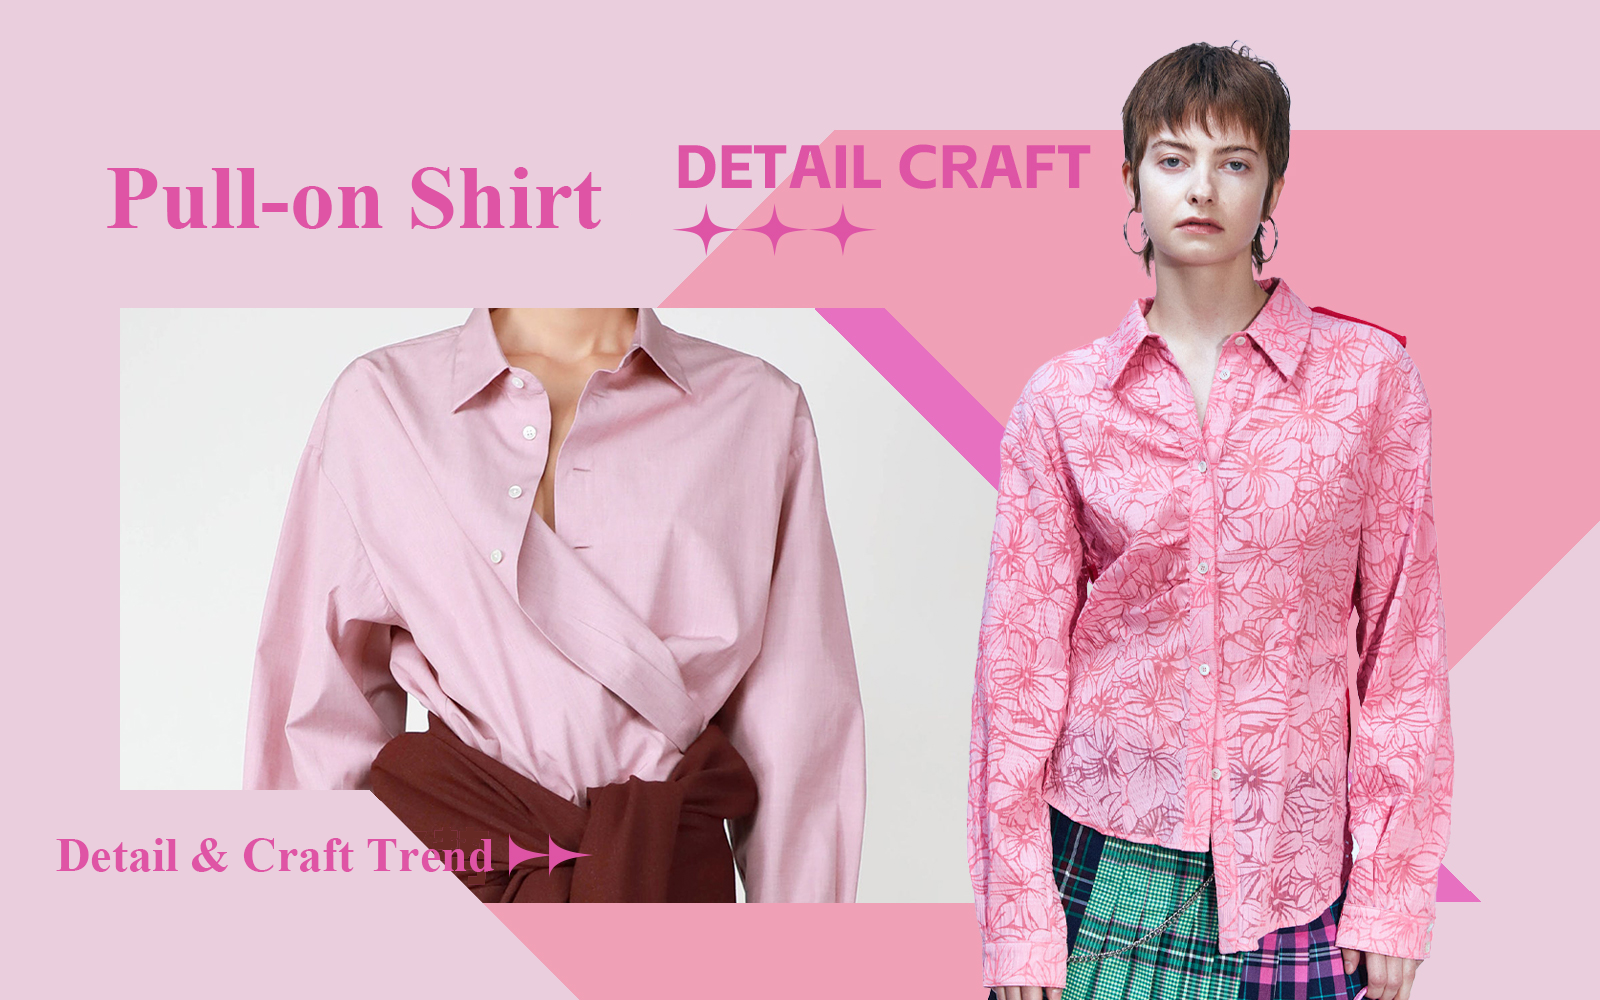 The Detail & Craft Trend for Women's Pull-on Shirt